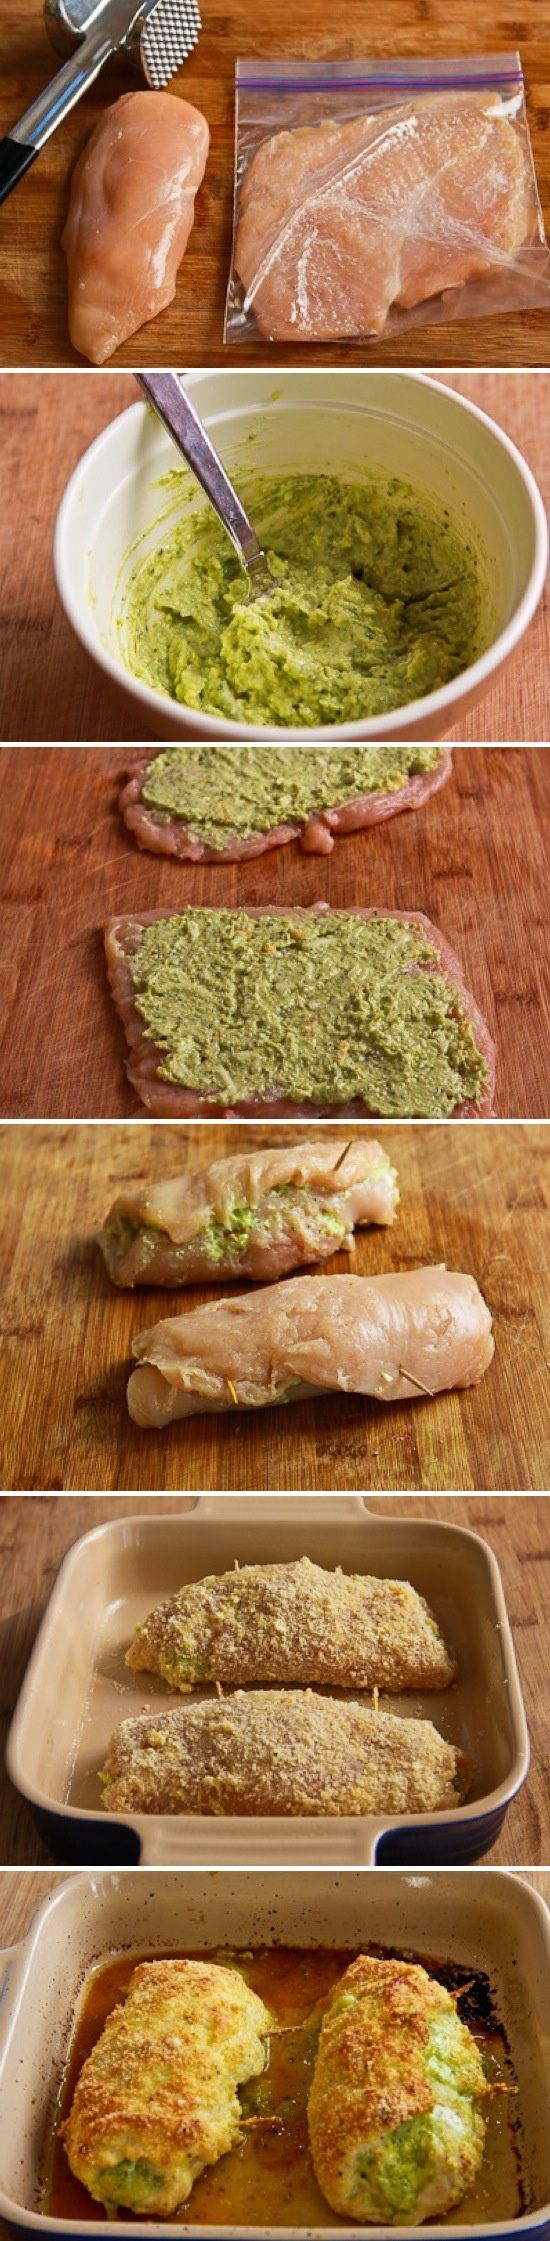 Going to try this pesto chicken recipe tonight with a side summer salad with cherry tomatoes, cucumbers, radishes, spinach, and